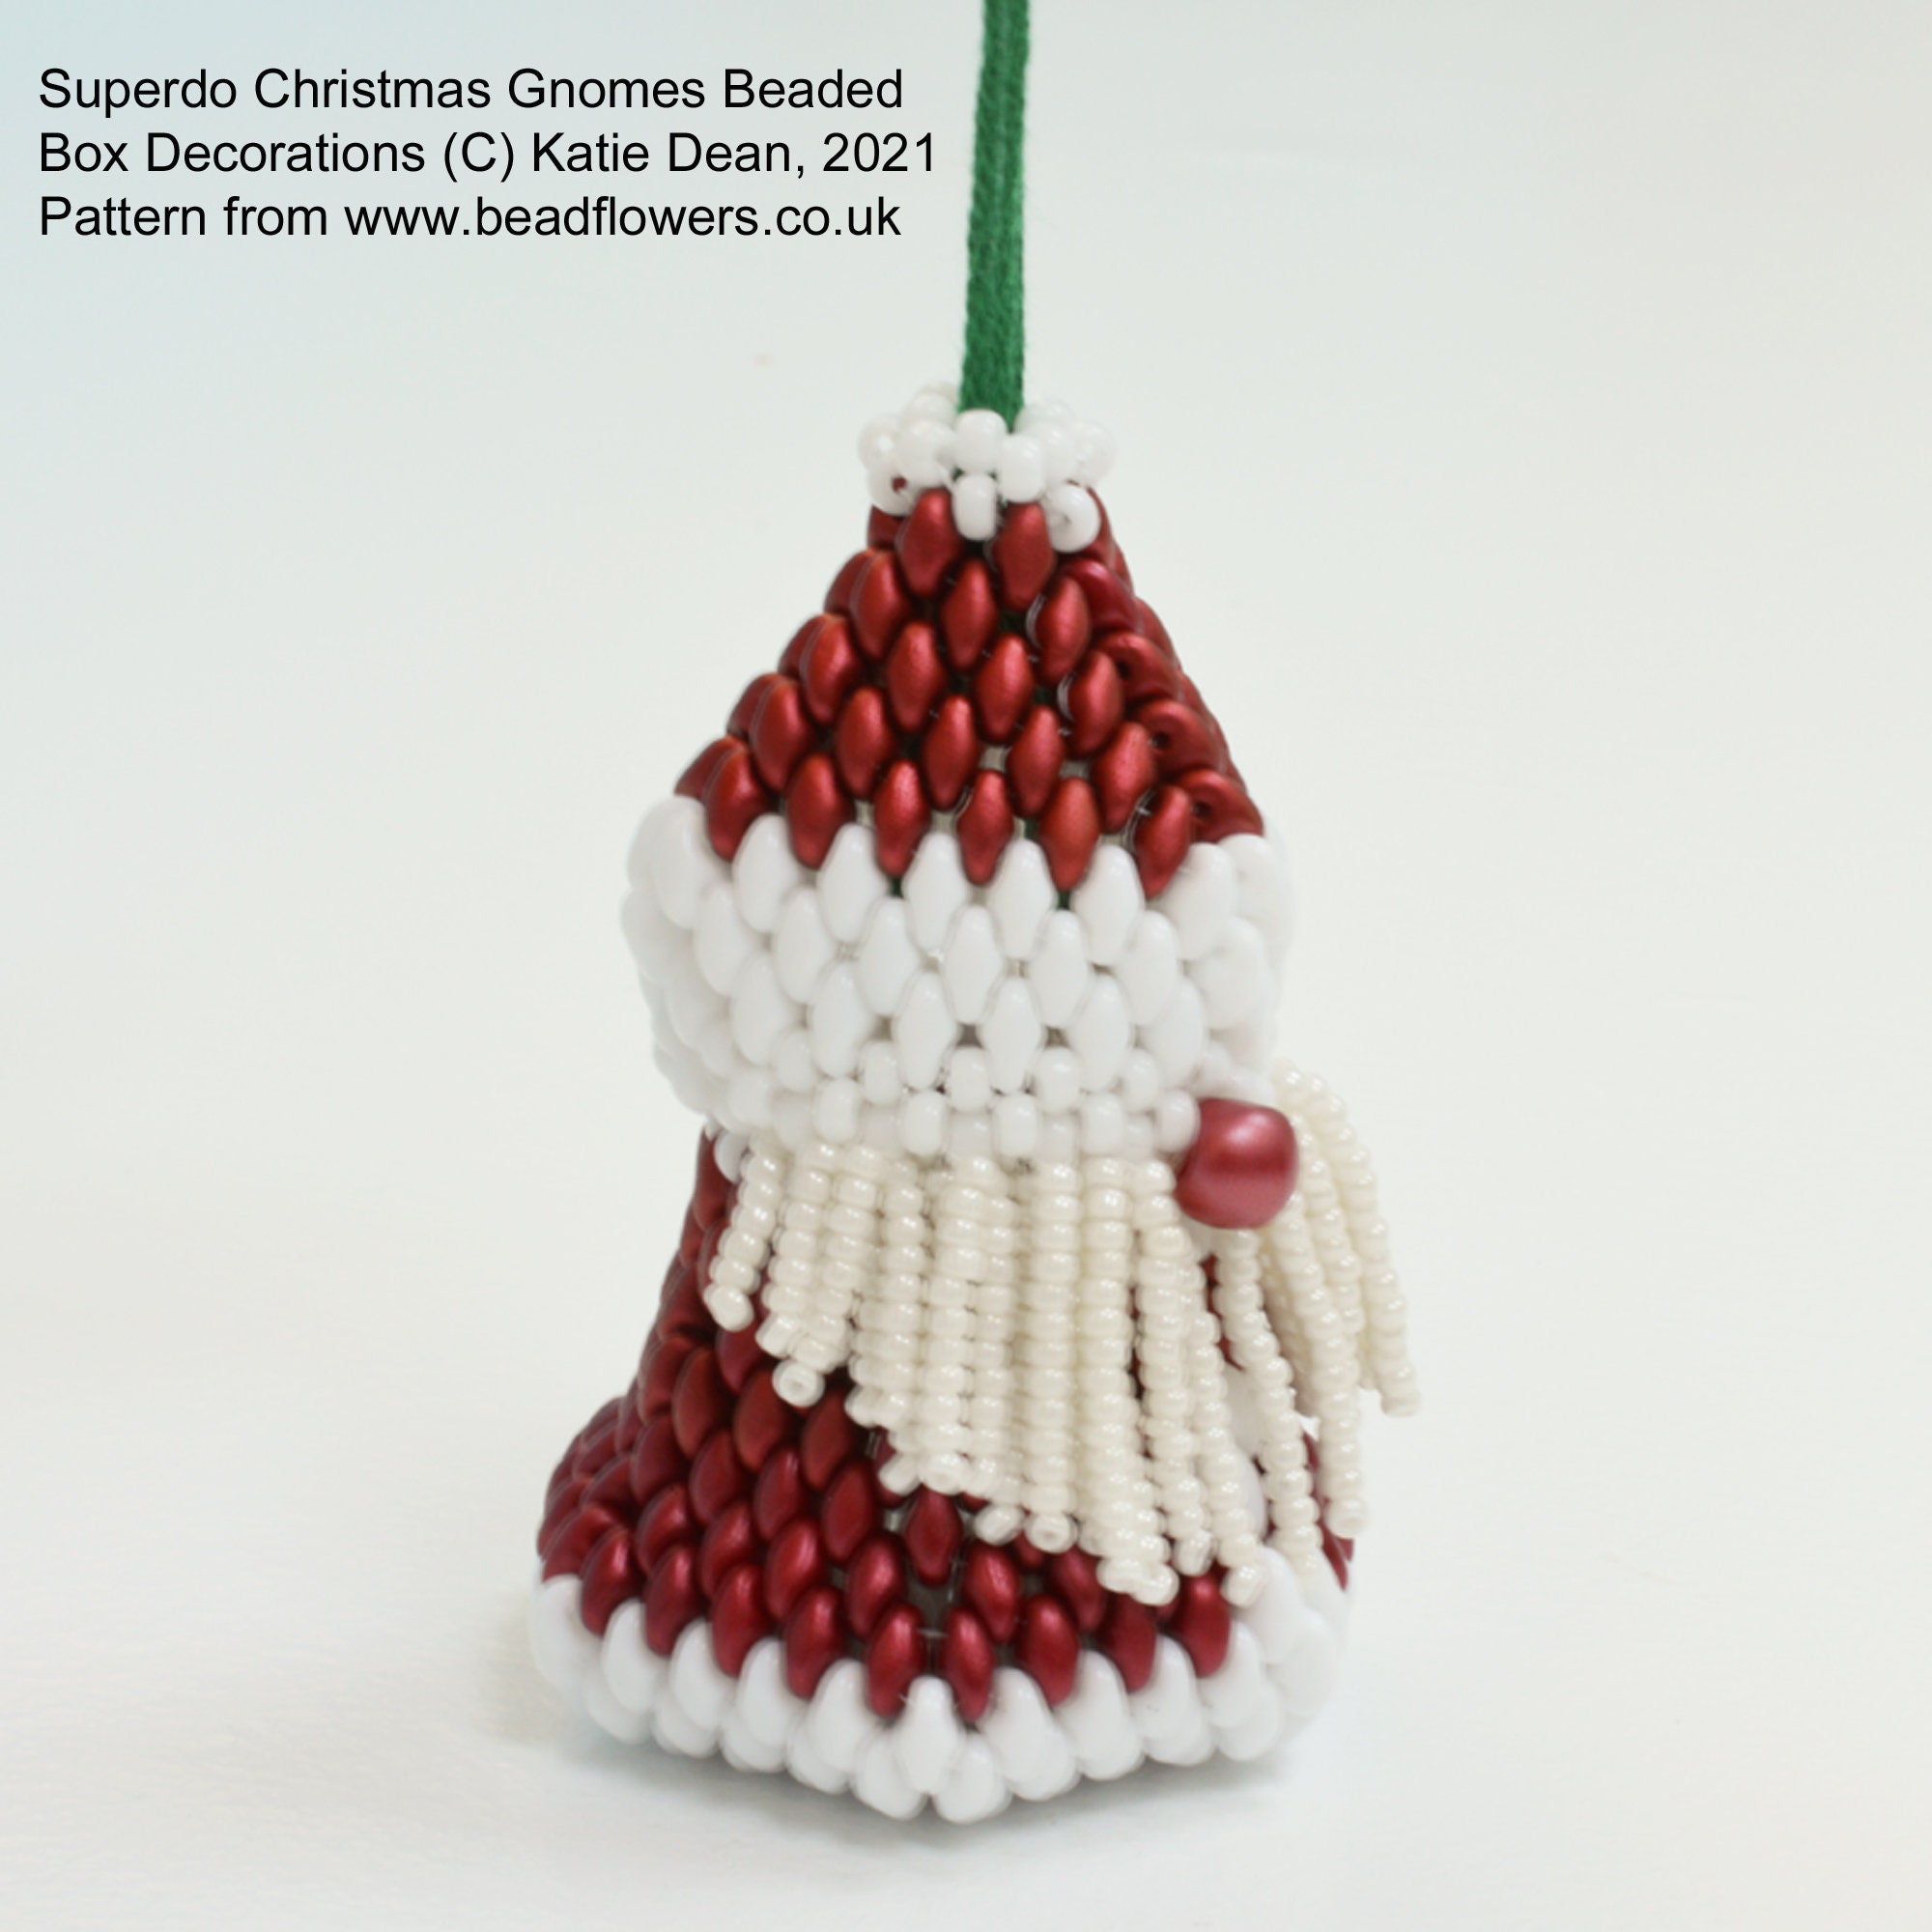 New Year's Toy Christmas Gnome Bead Embroidery Kit, code BI-112 Sozvezdie